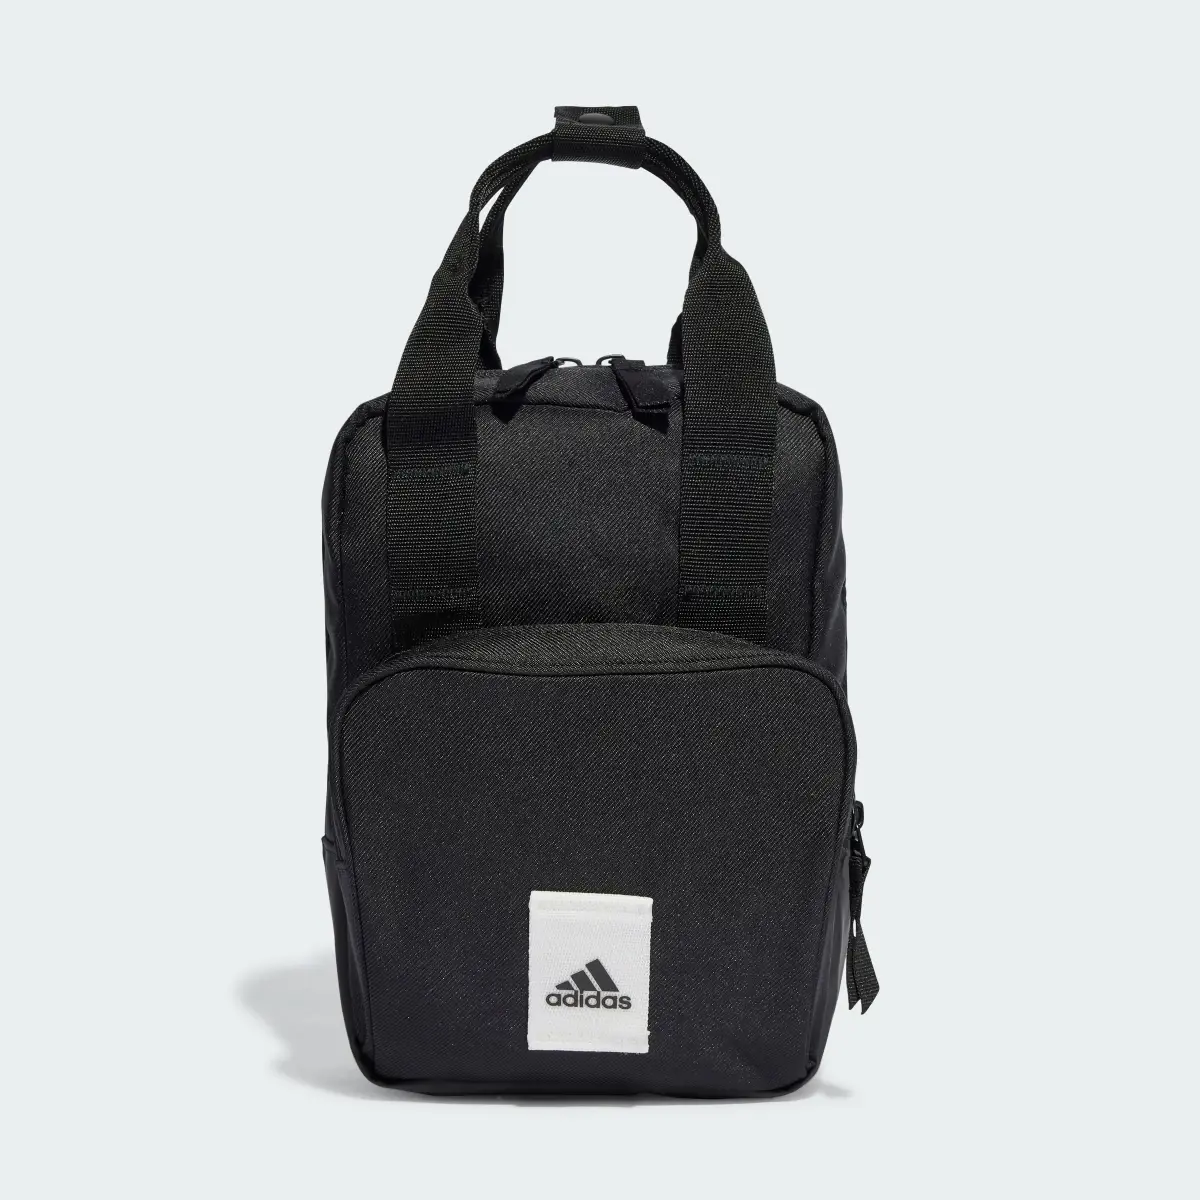 Adidas Prime Backpack Extra Small. 2